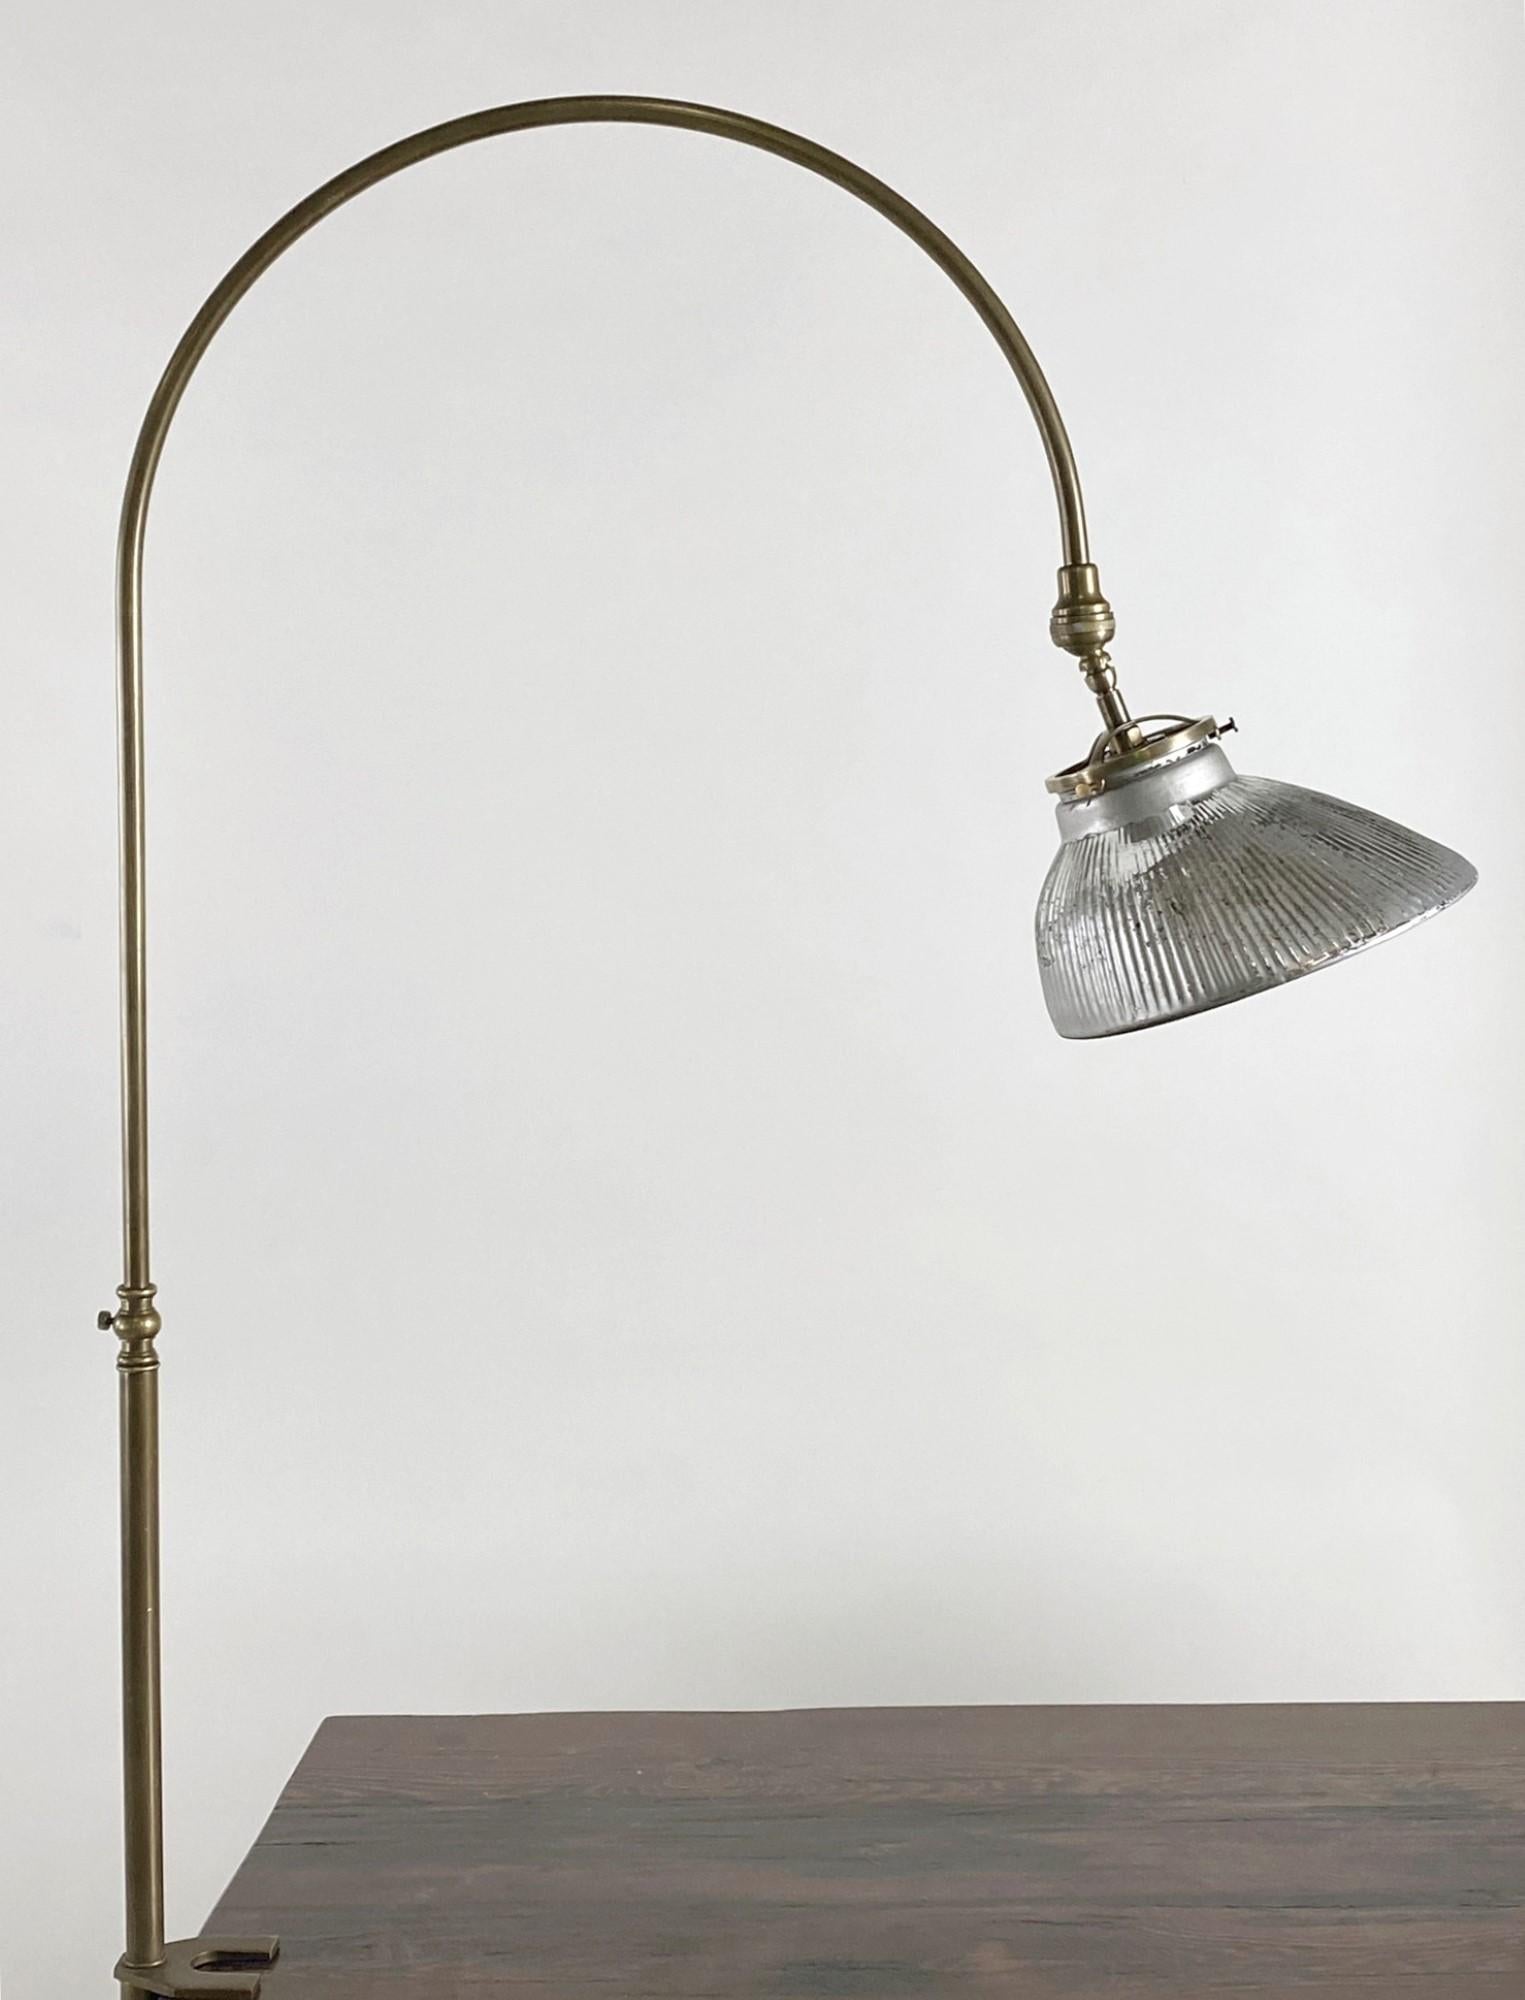 1920s brass gooseneck desk lamp made with a mercury glass shade. Features a 10 foot cord with a thumb on/off switch. Uses a normal household light bulb. Small quantity available at time of posting. Priced each. This can be seen at our 400 Gilligan